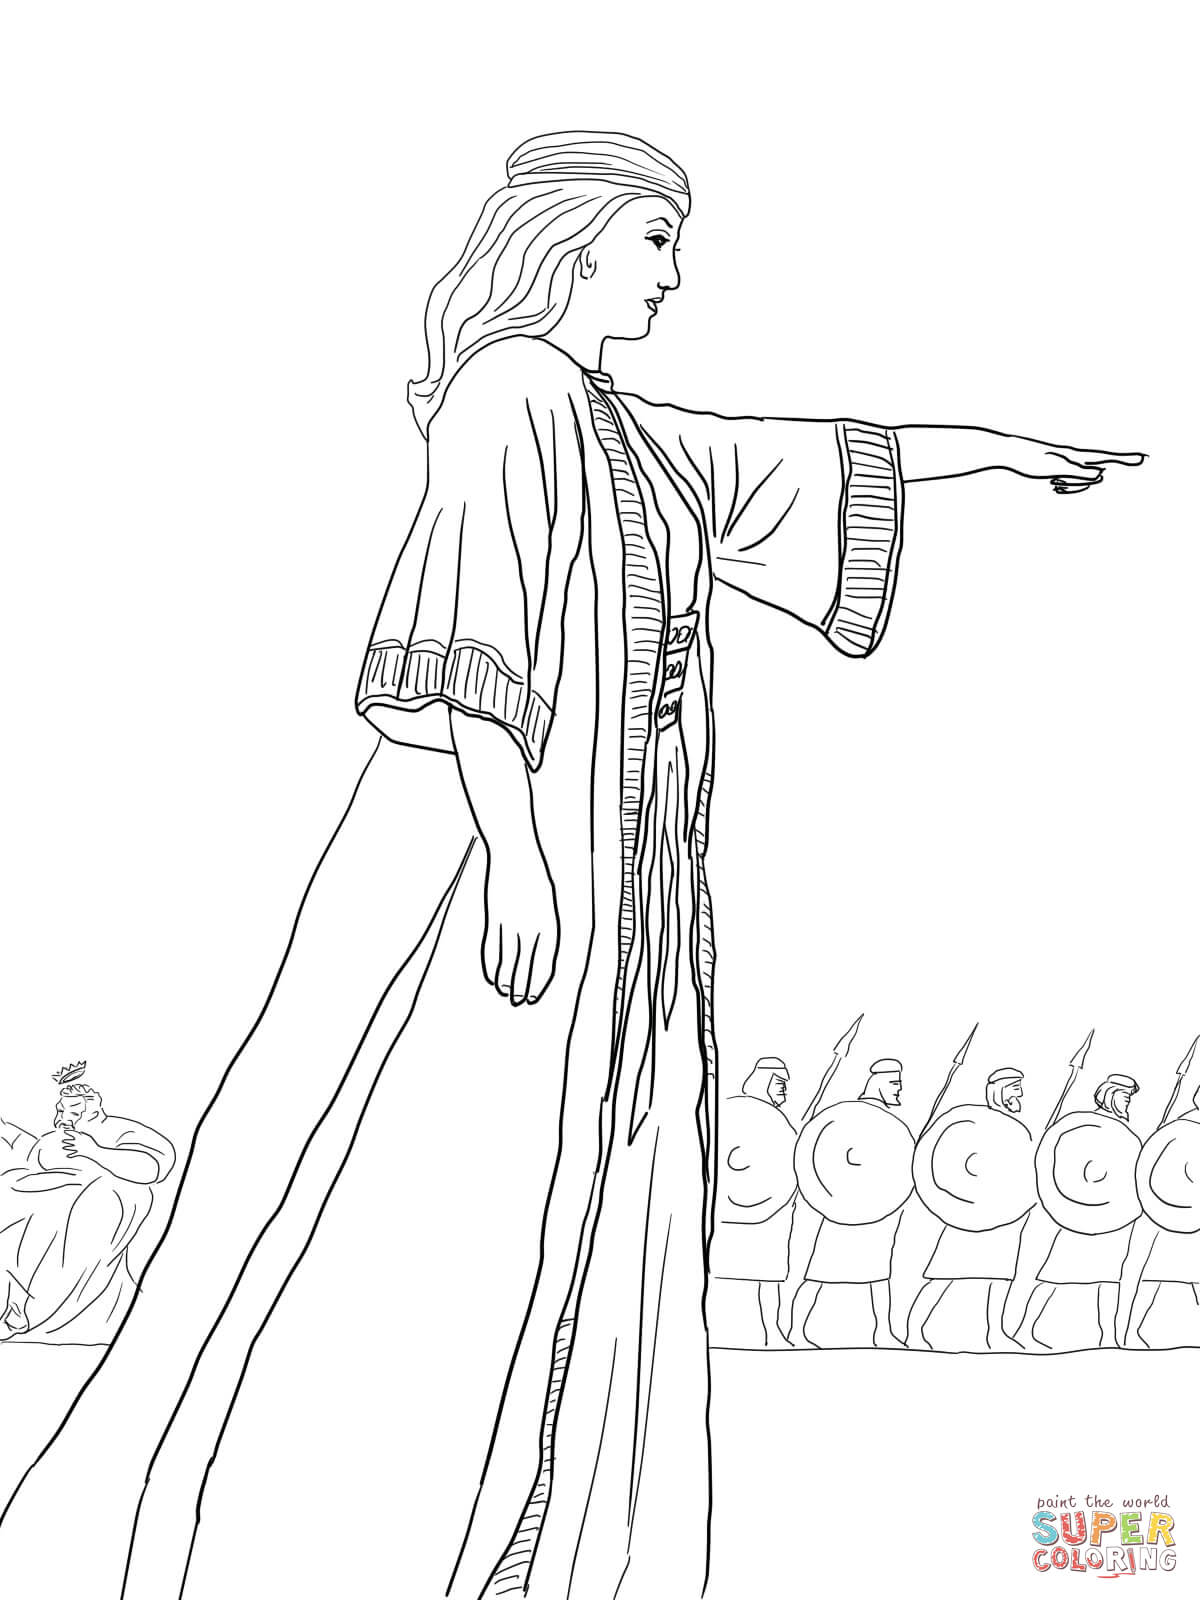 Deborah the prophetess coloring page free printable coloring pages